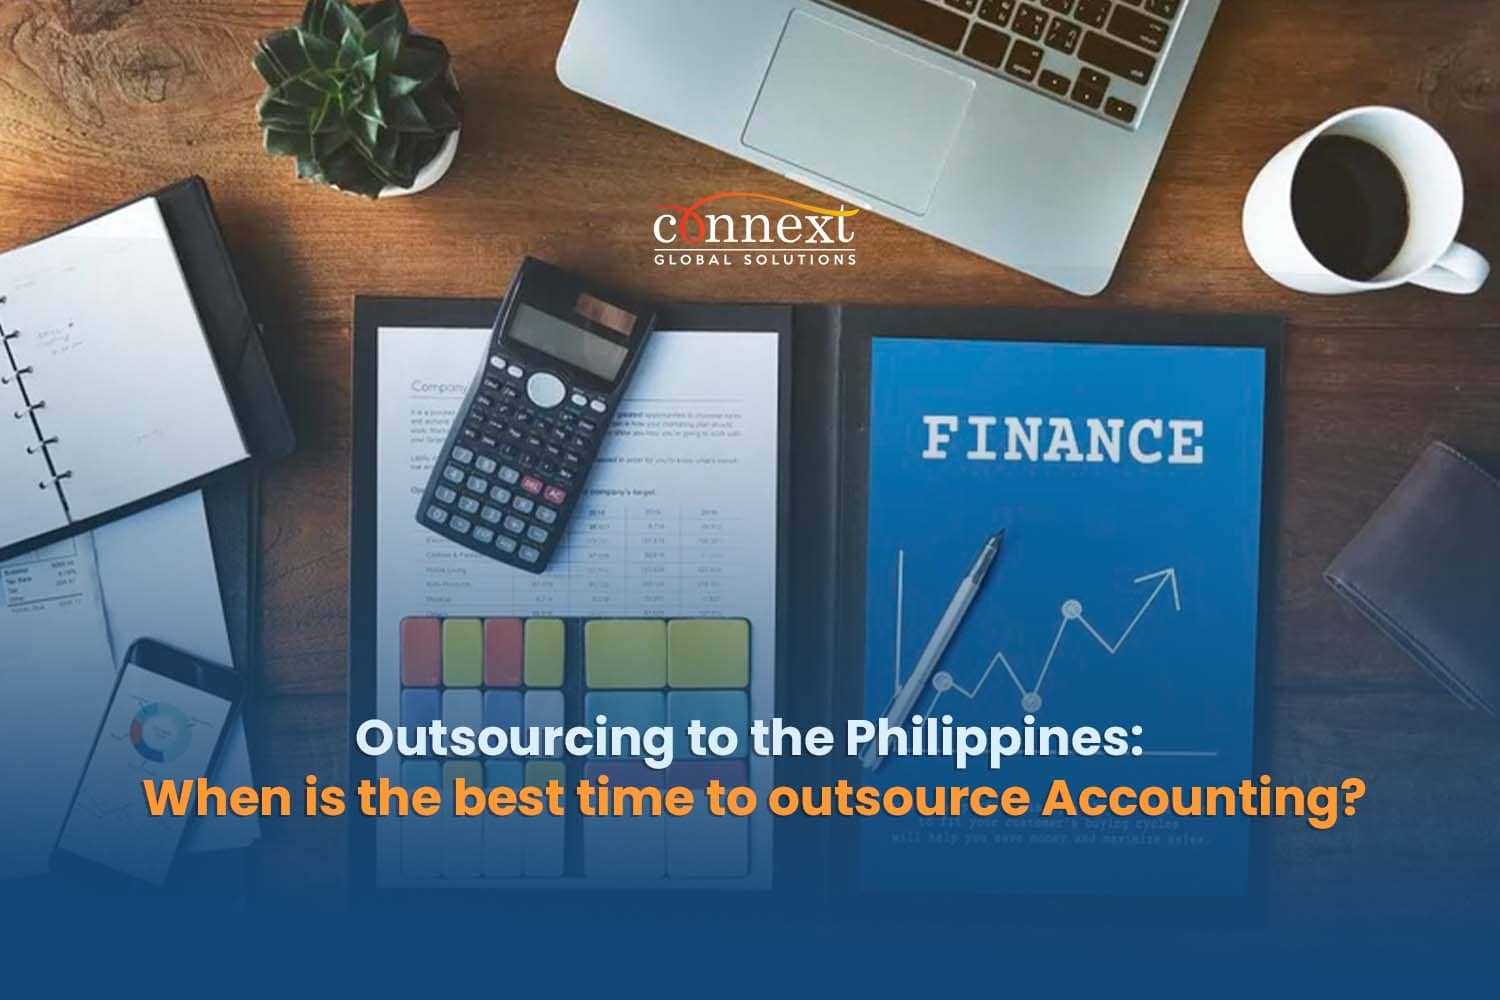 Outsourcing Accounting to the Philippines: When is the best time to outsource Accounting?